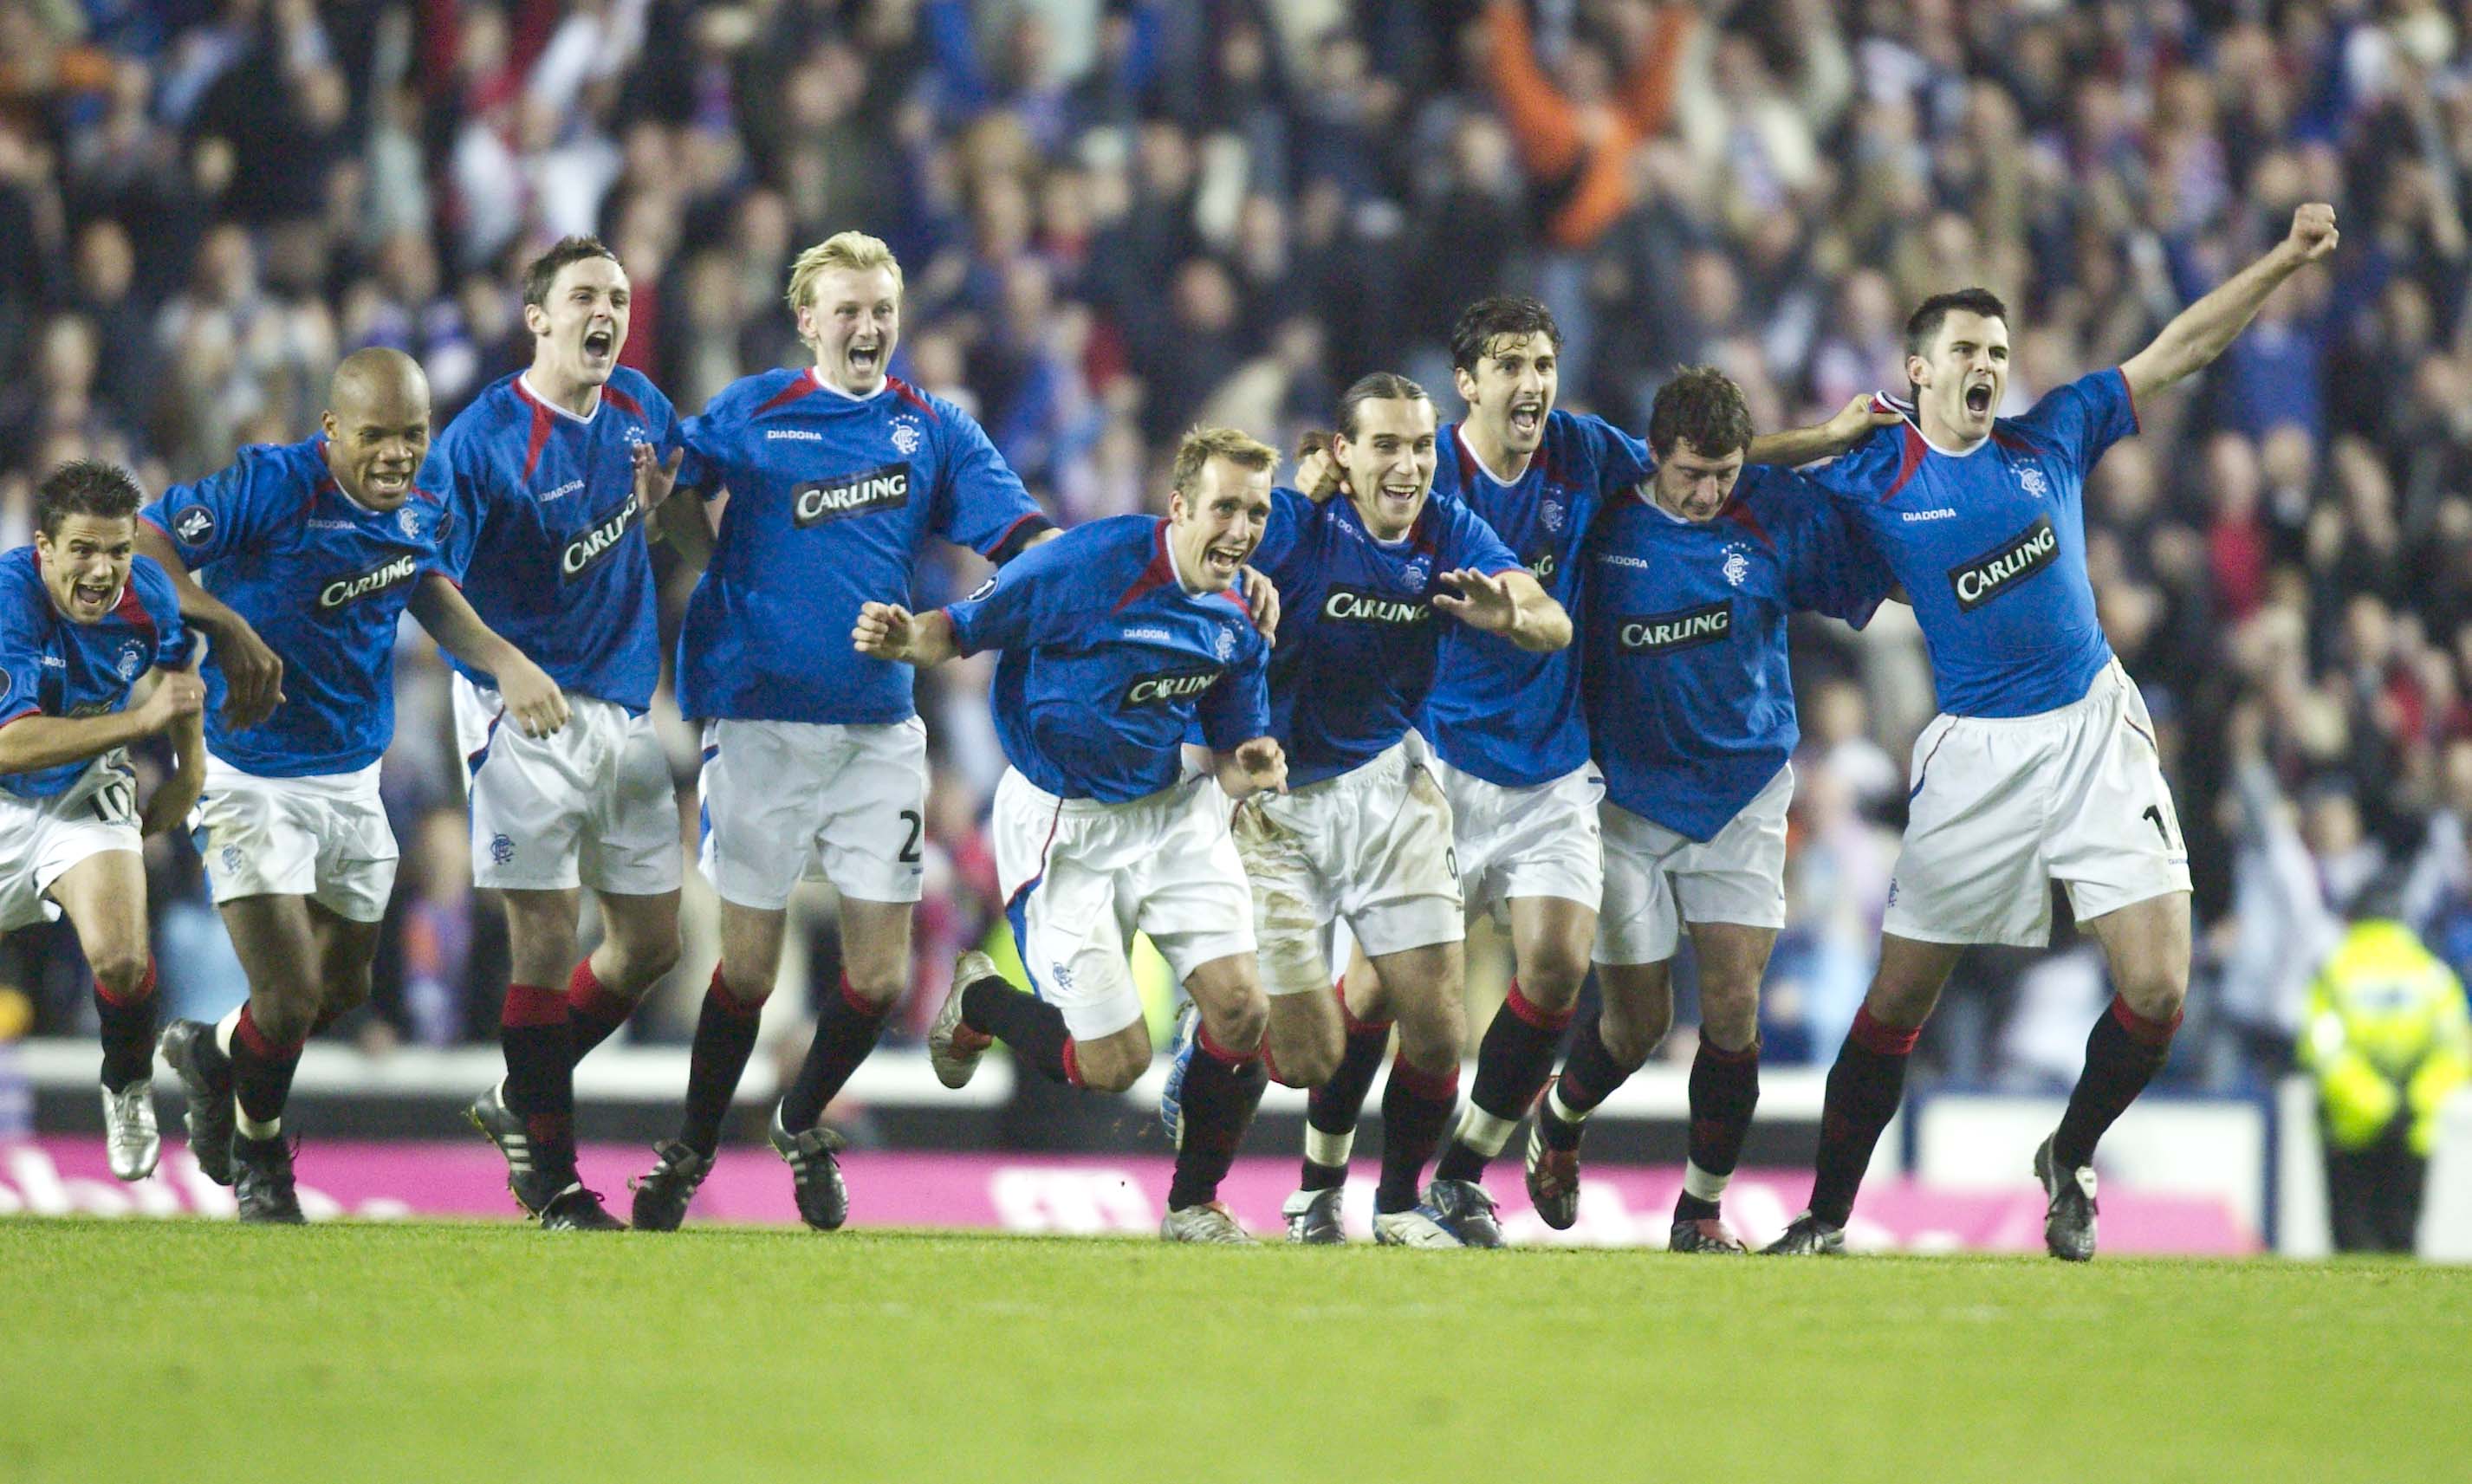 Fernando Ricksen leads the charge from the centre circle after winning the shoot-out.